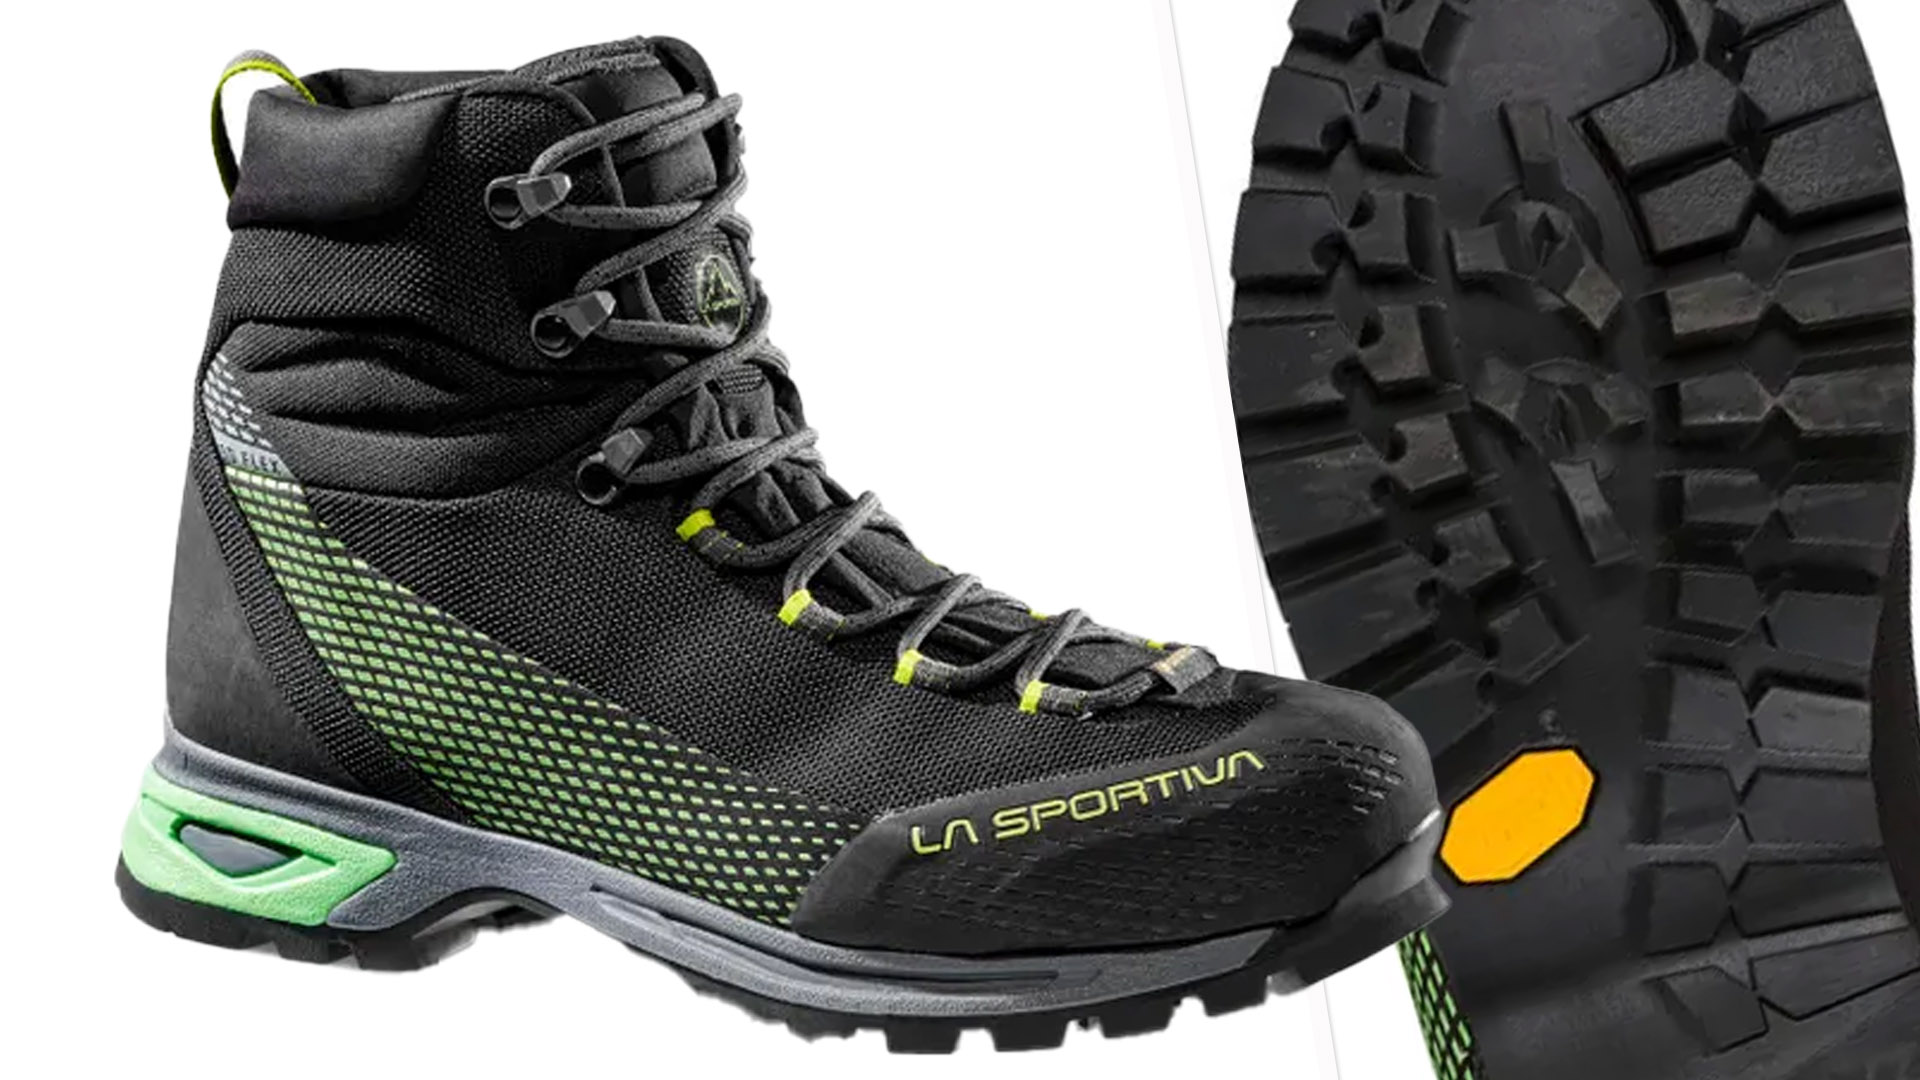 The Best Winter Hiking Boots: Synthetic and Vegan Winter Hiking